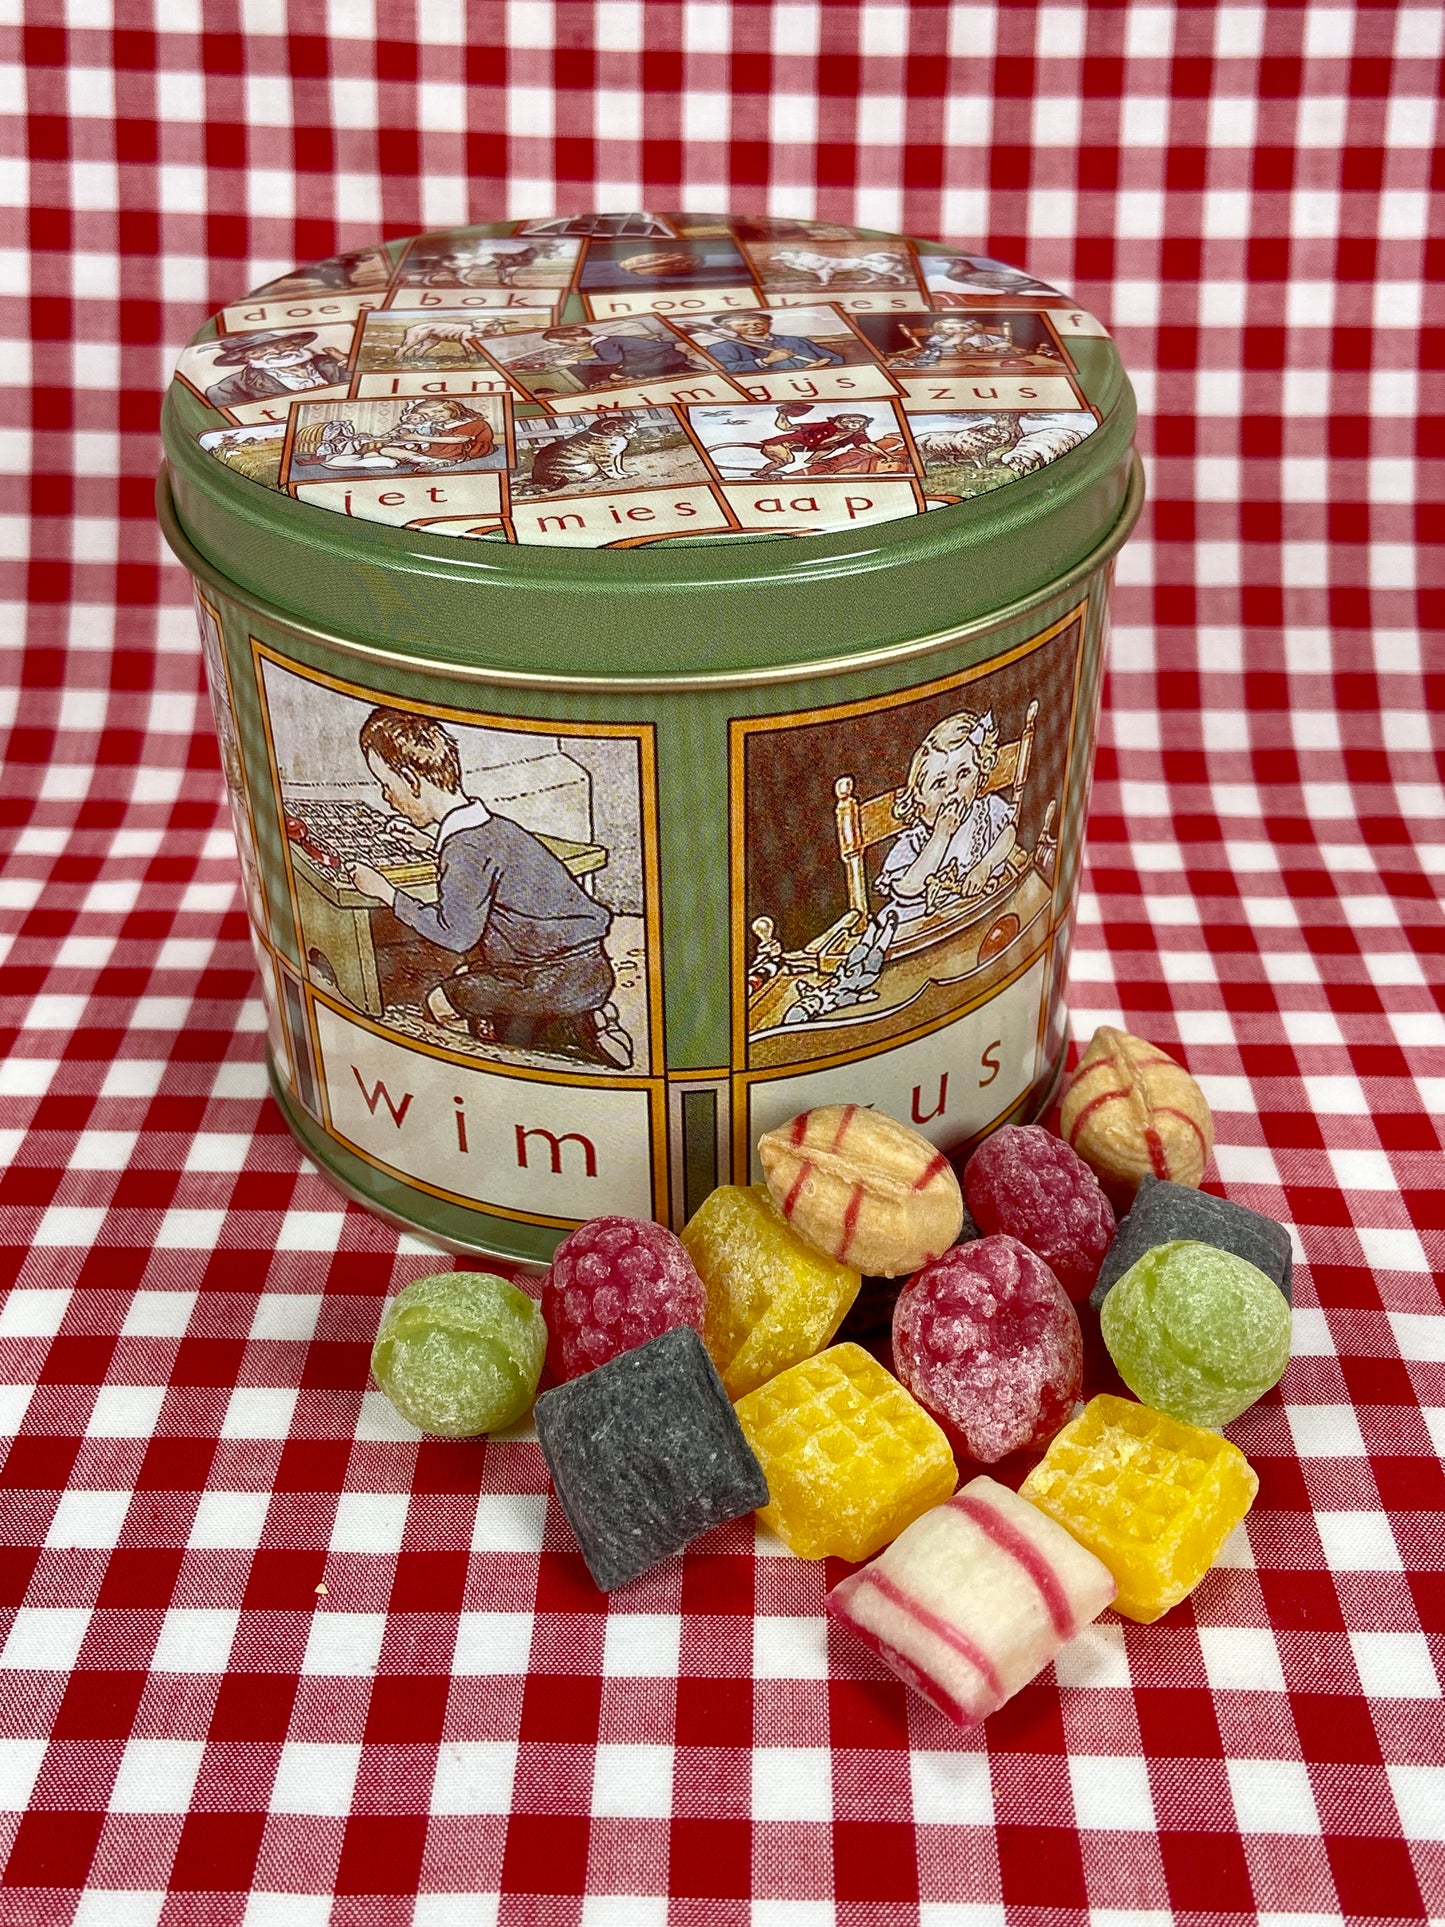 Aap noot mies - round tin with classic Dutch swets - Big Bite Dutch Treats